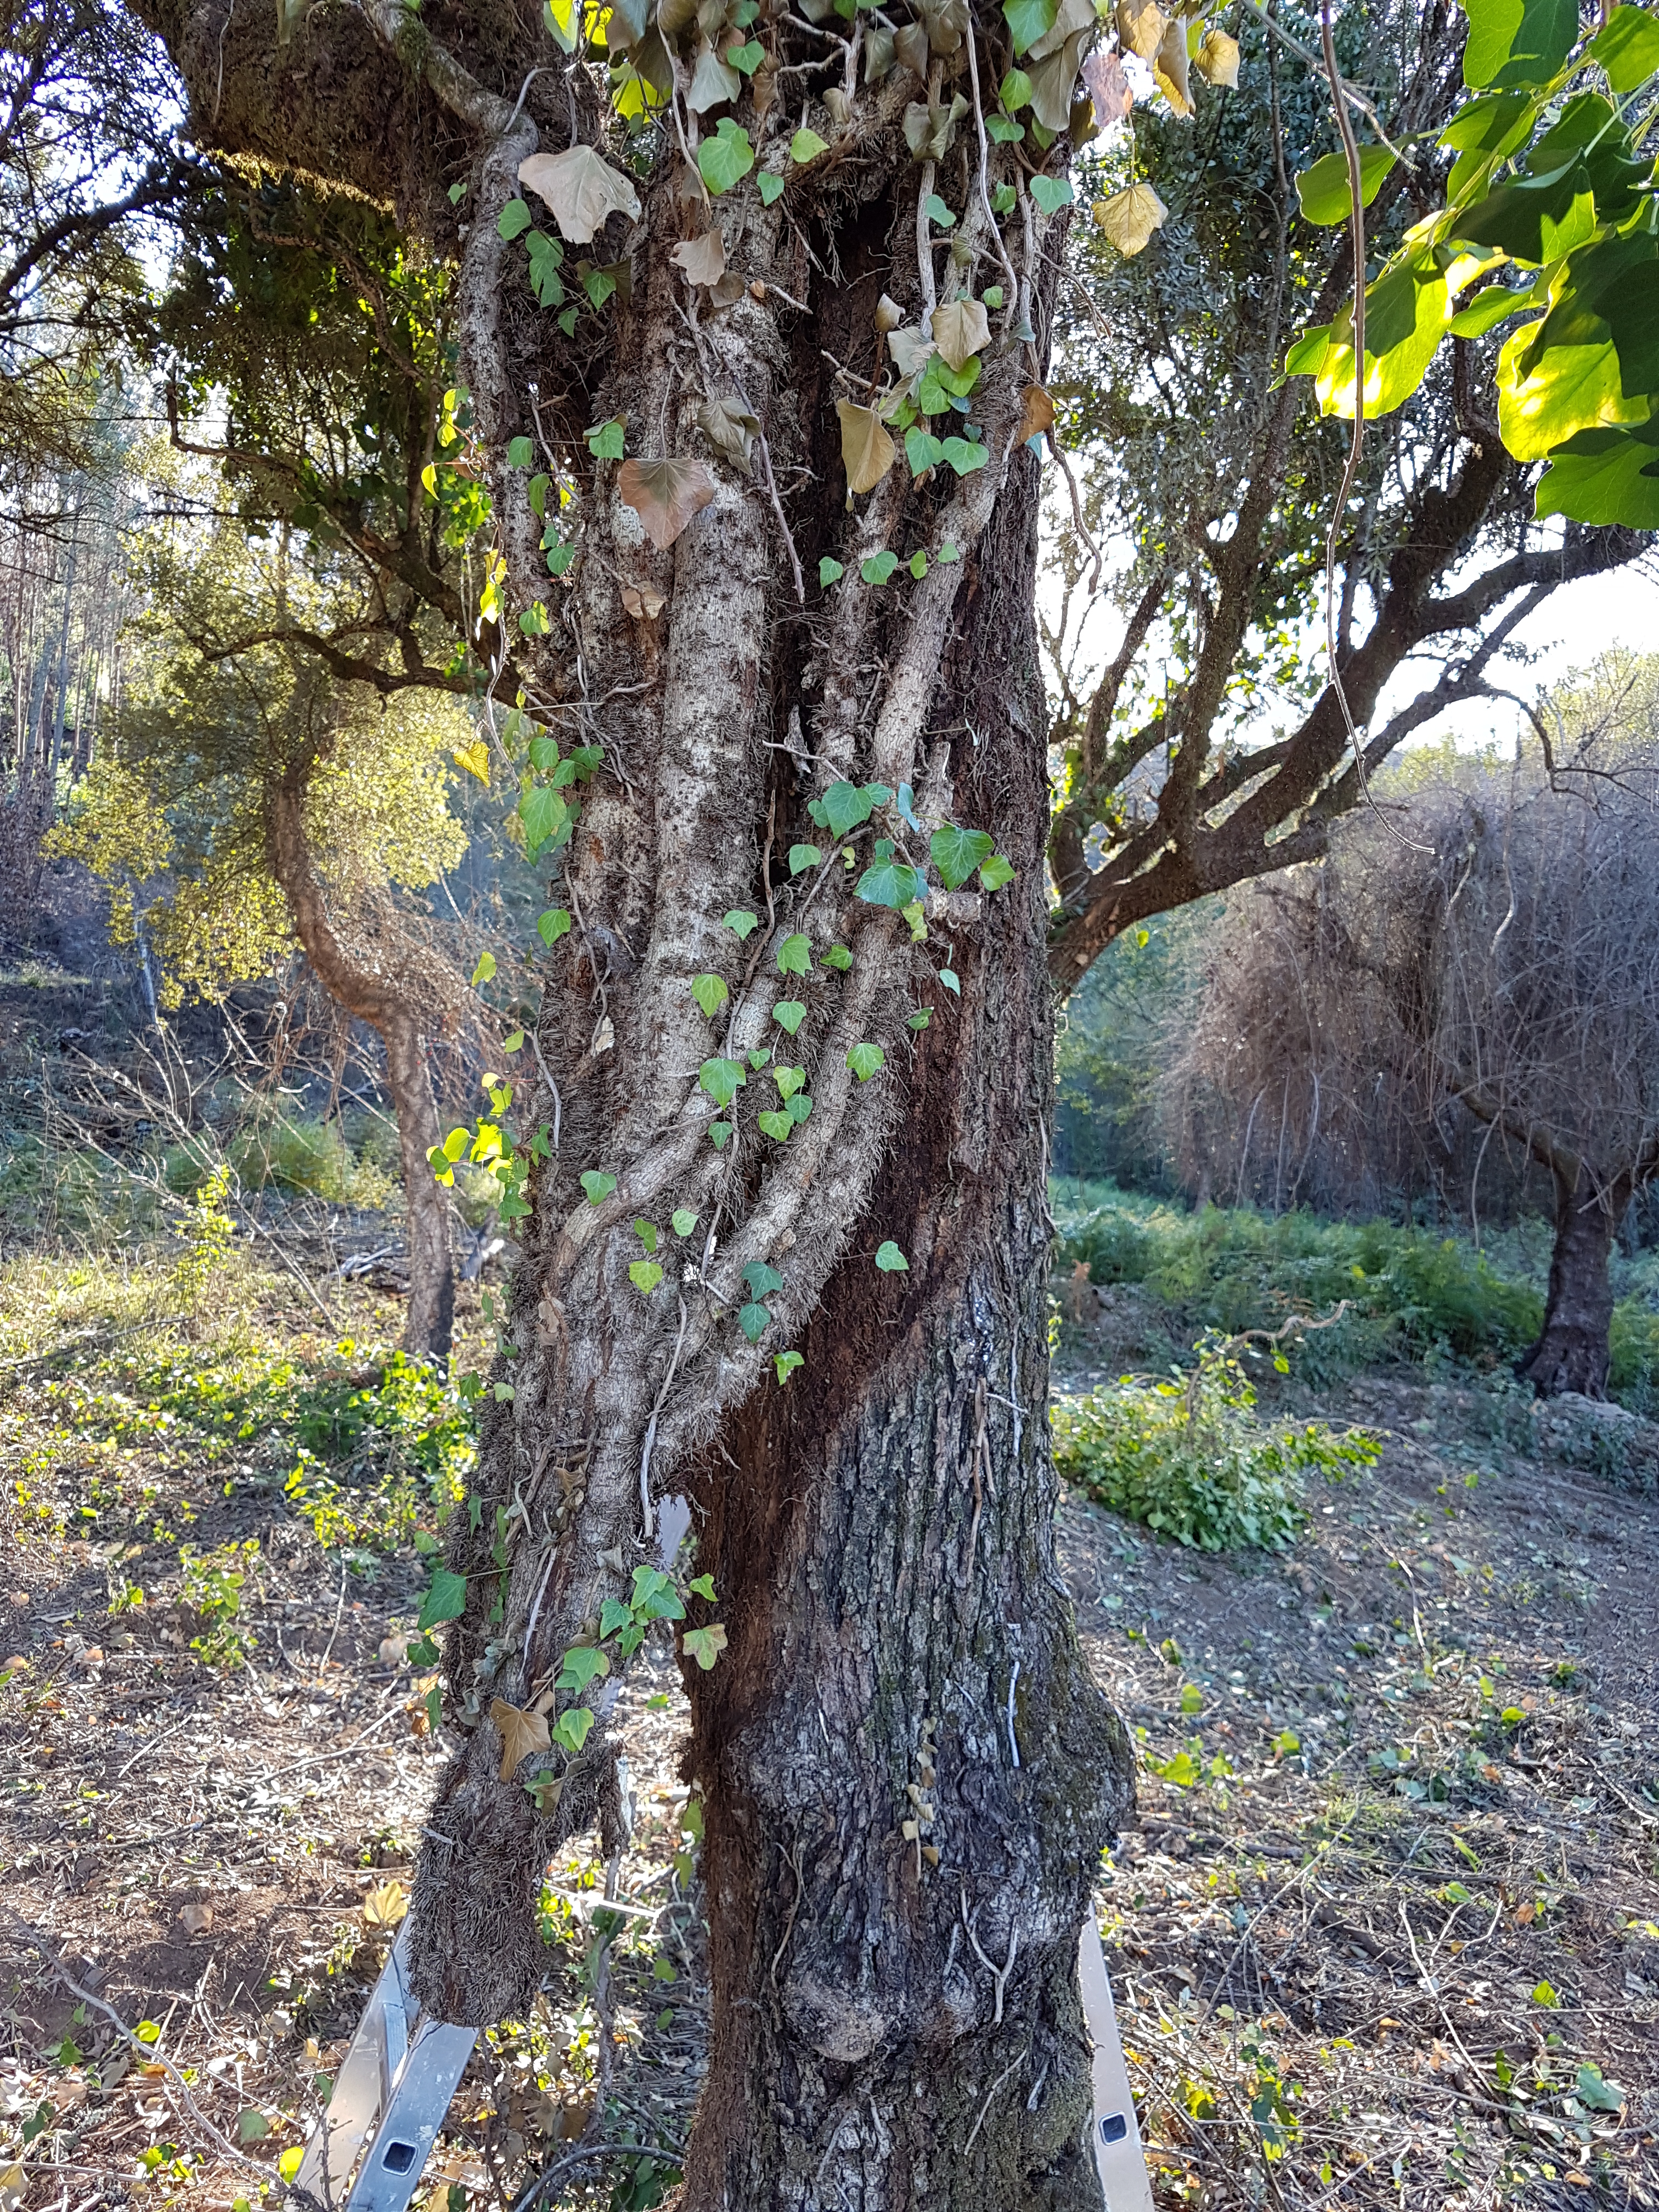 Despite the impressive girth of this common ivy trunk, it wasn’t strangling the olive. It was aggressively competing for light.